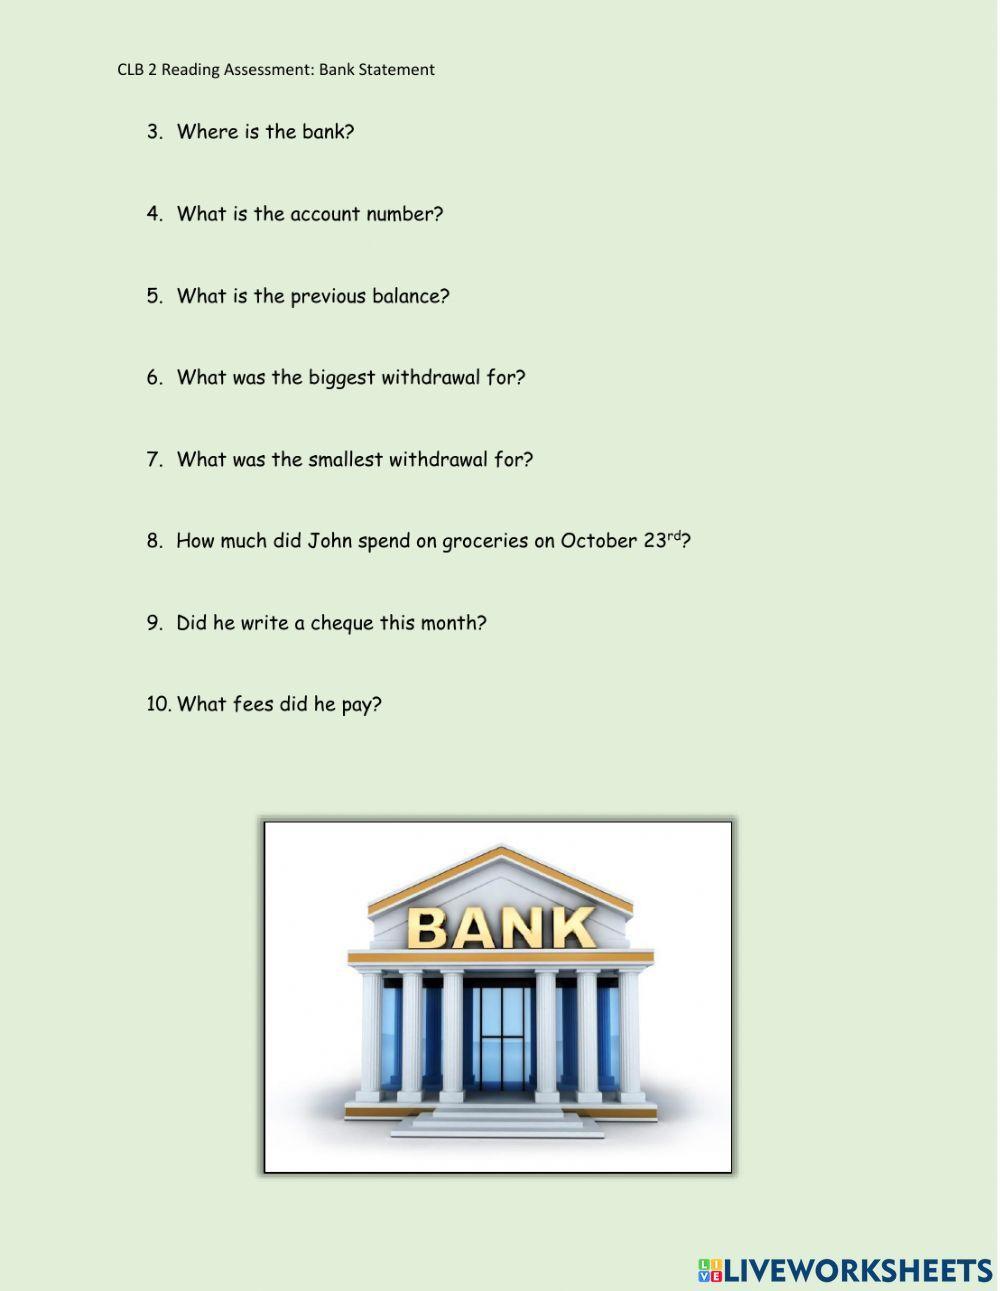 CLB2 Reading Assessment - Bank Statement